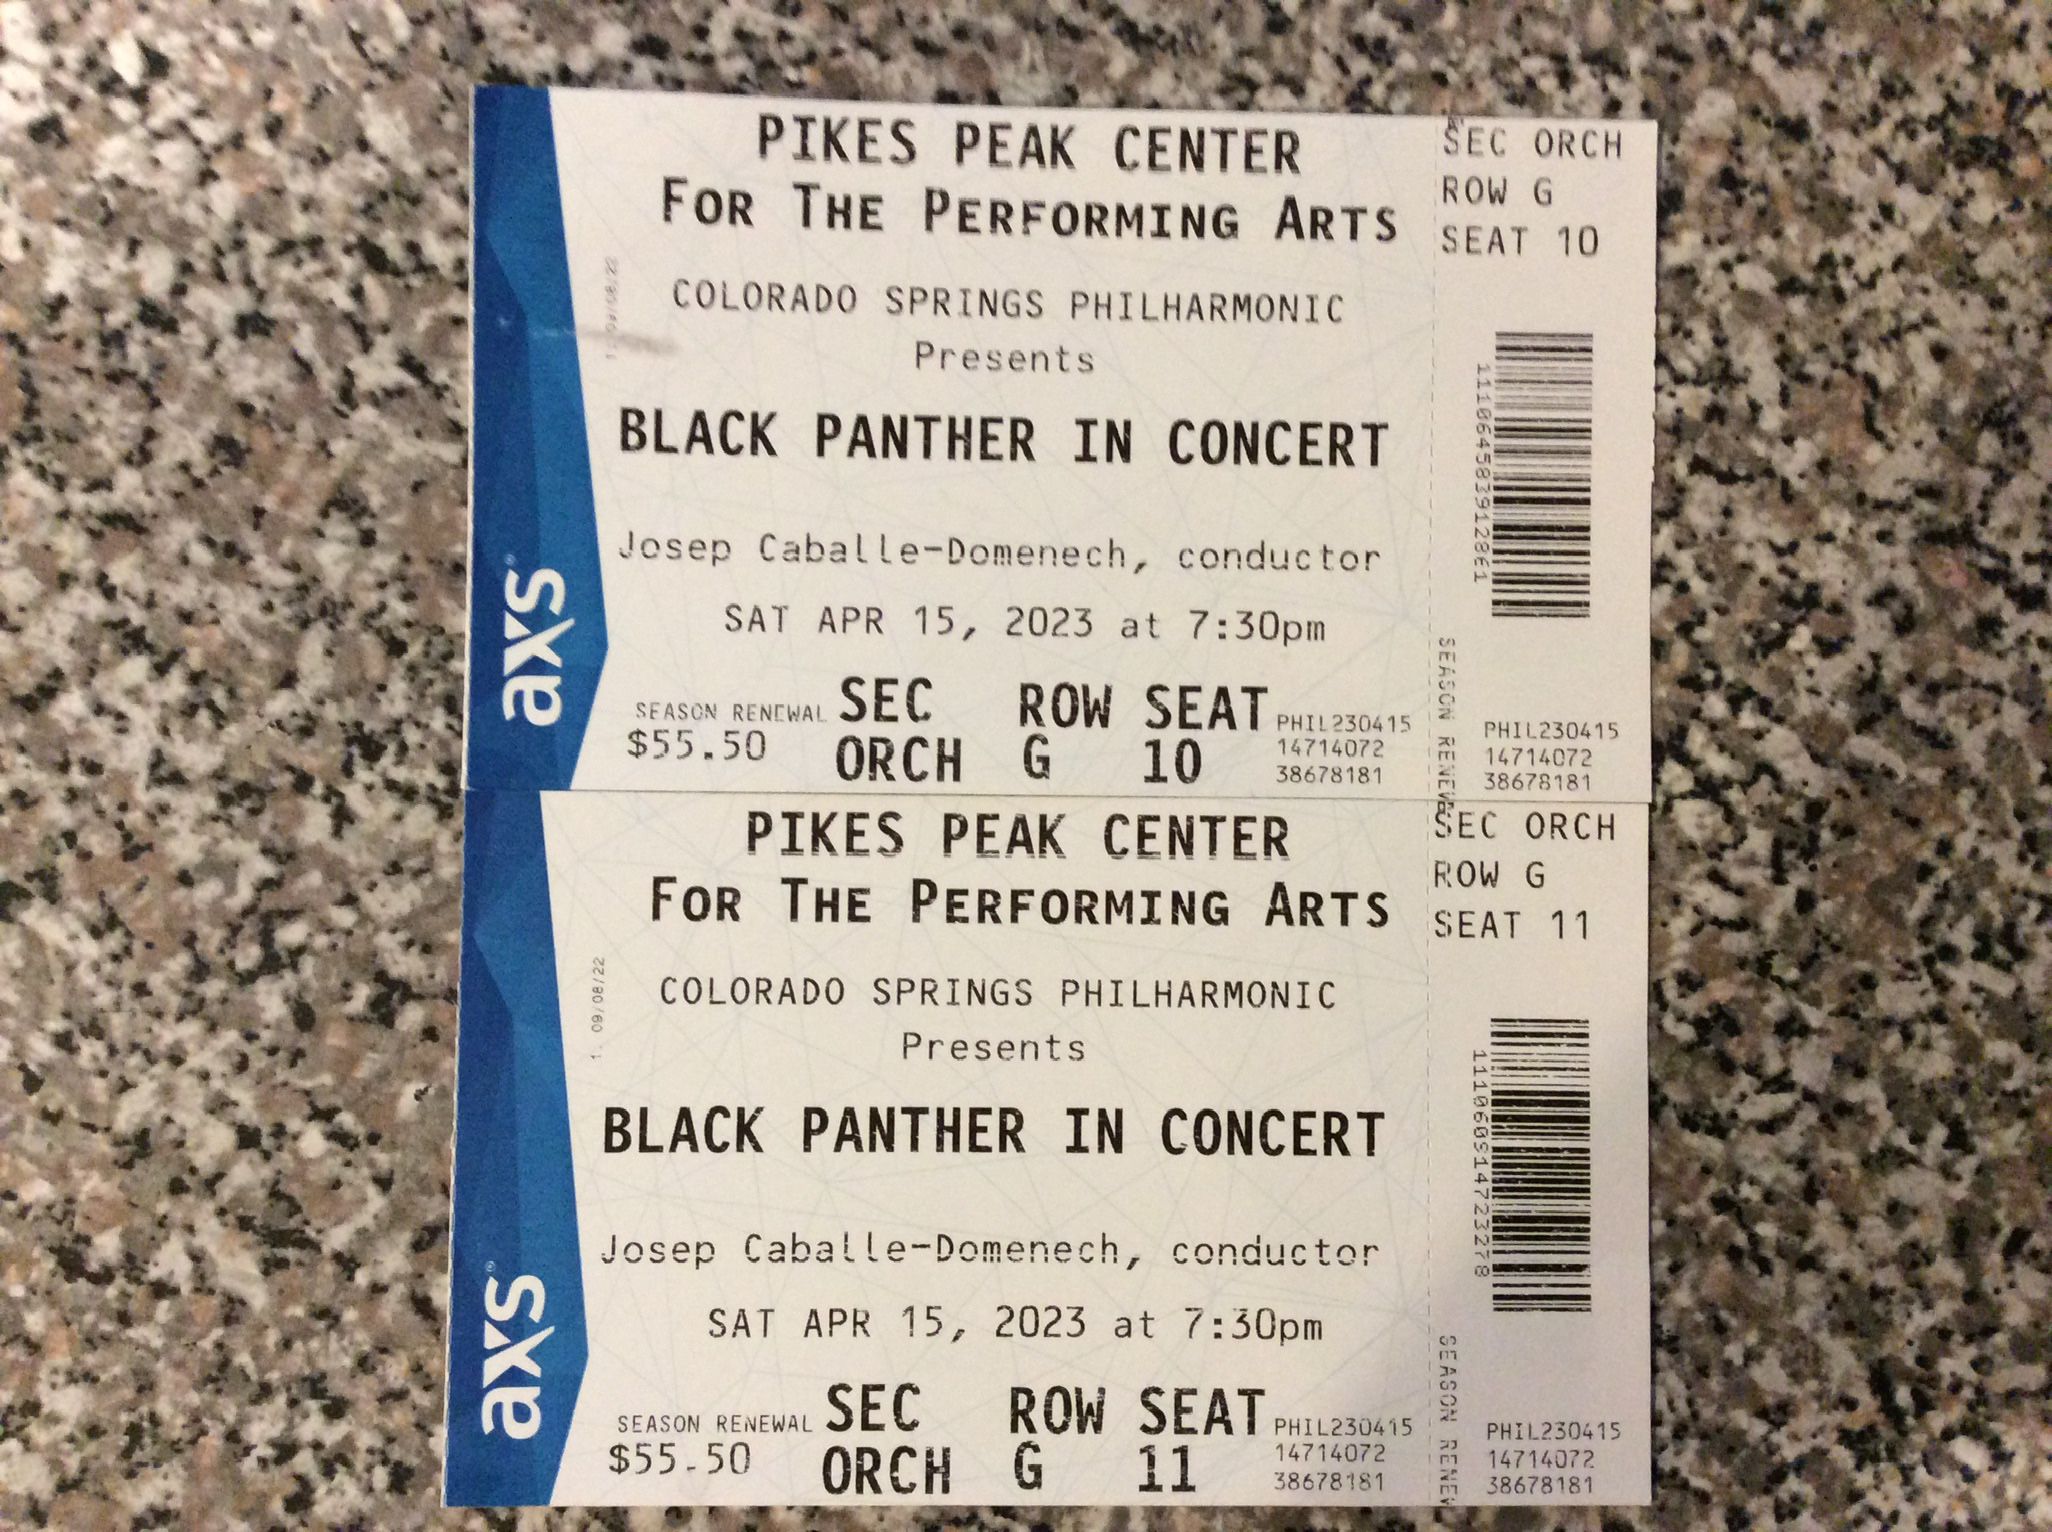 Black Panther Tickets For The Pikes Peak Center Black panther tickets for the Pikes Peak center